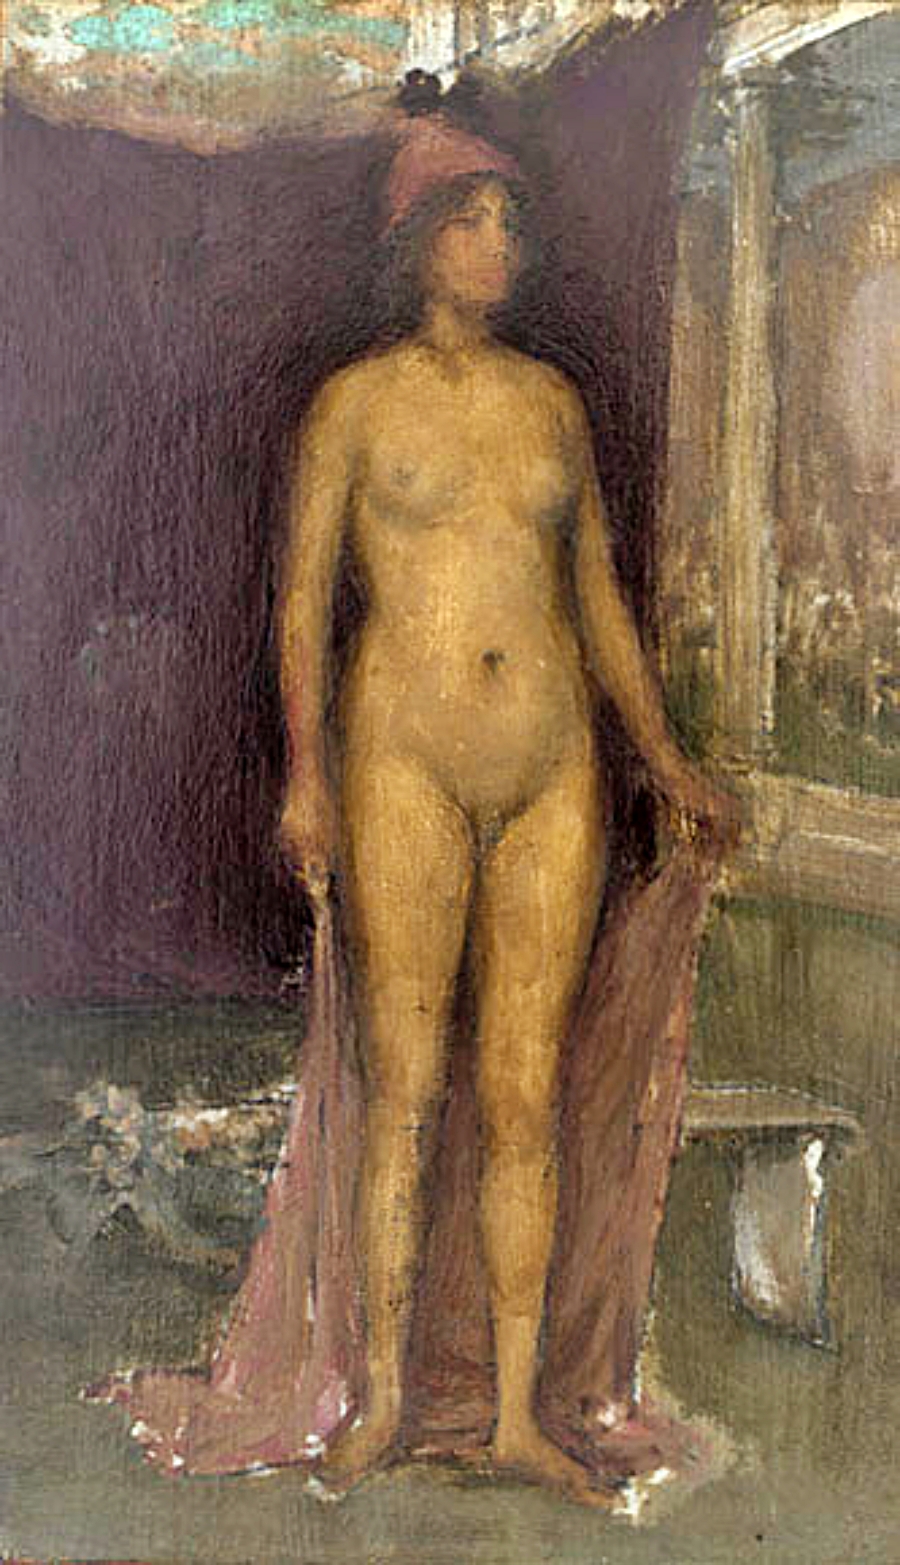 Purple and Gold: Phryne the Superb! - Builder of Temples, c. 1898